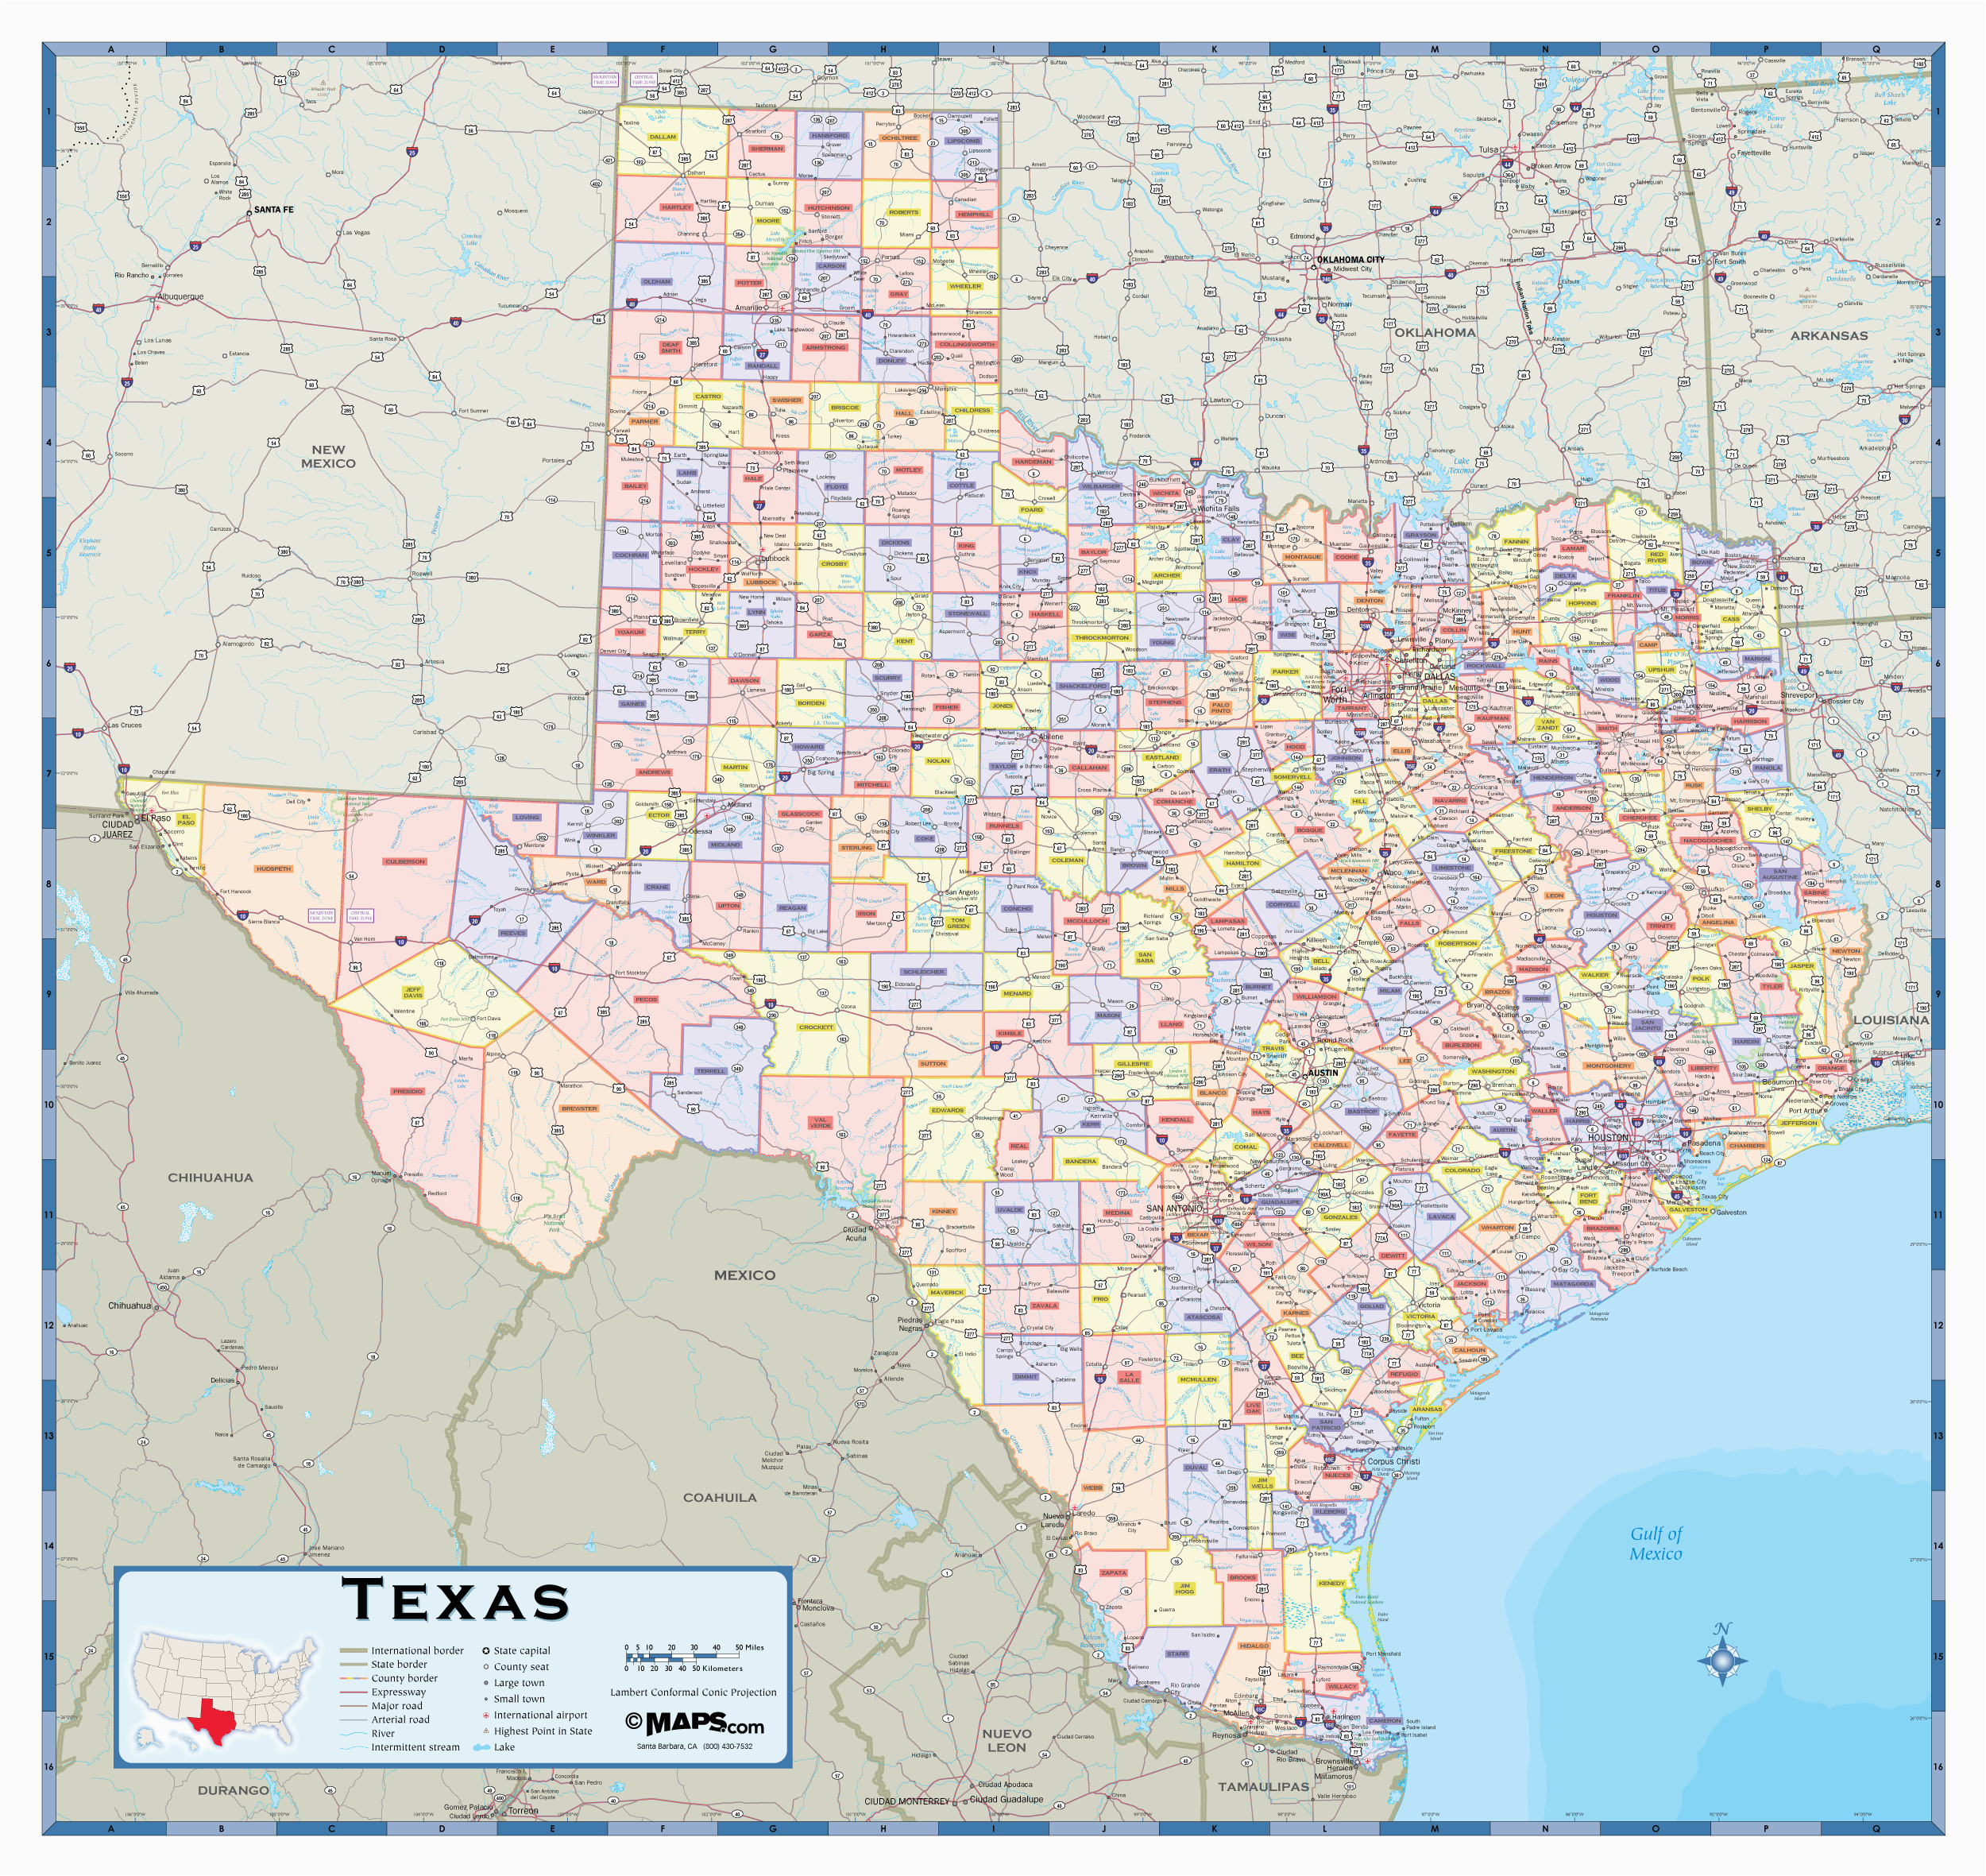 geographical maps of texas sitedesignco net